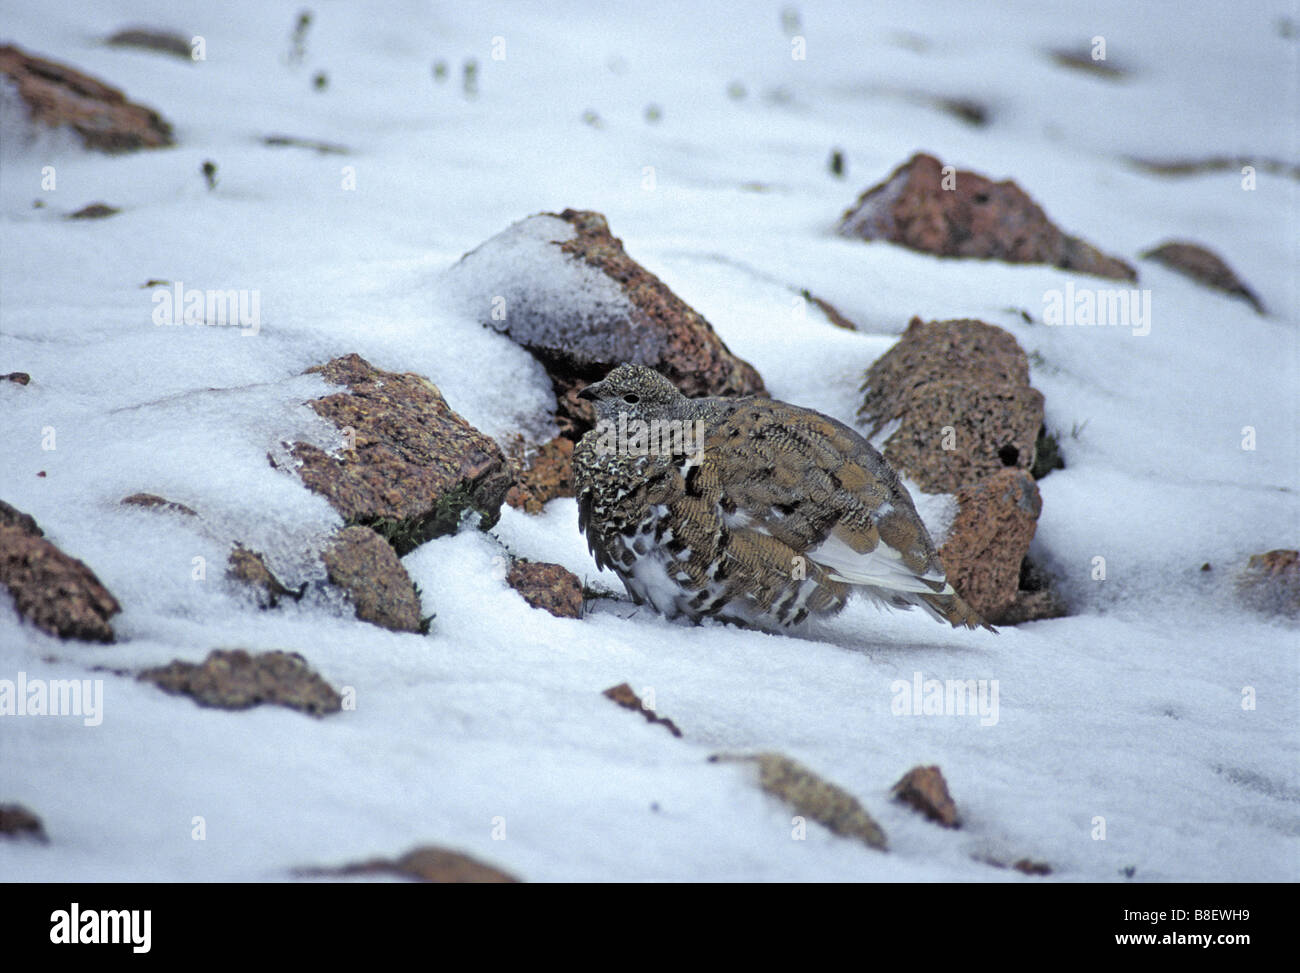 A White-tailed Ptarmigan (Logopus leucurus) blends in among the rocks with summer snow on Mt. Evans, Colorado US. Stock Photo